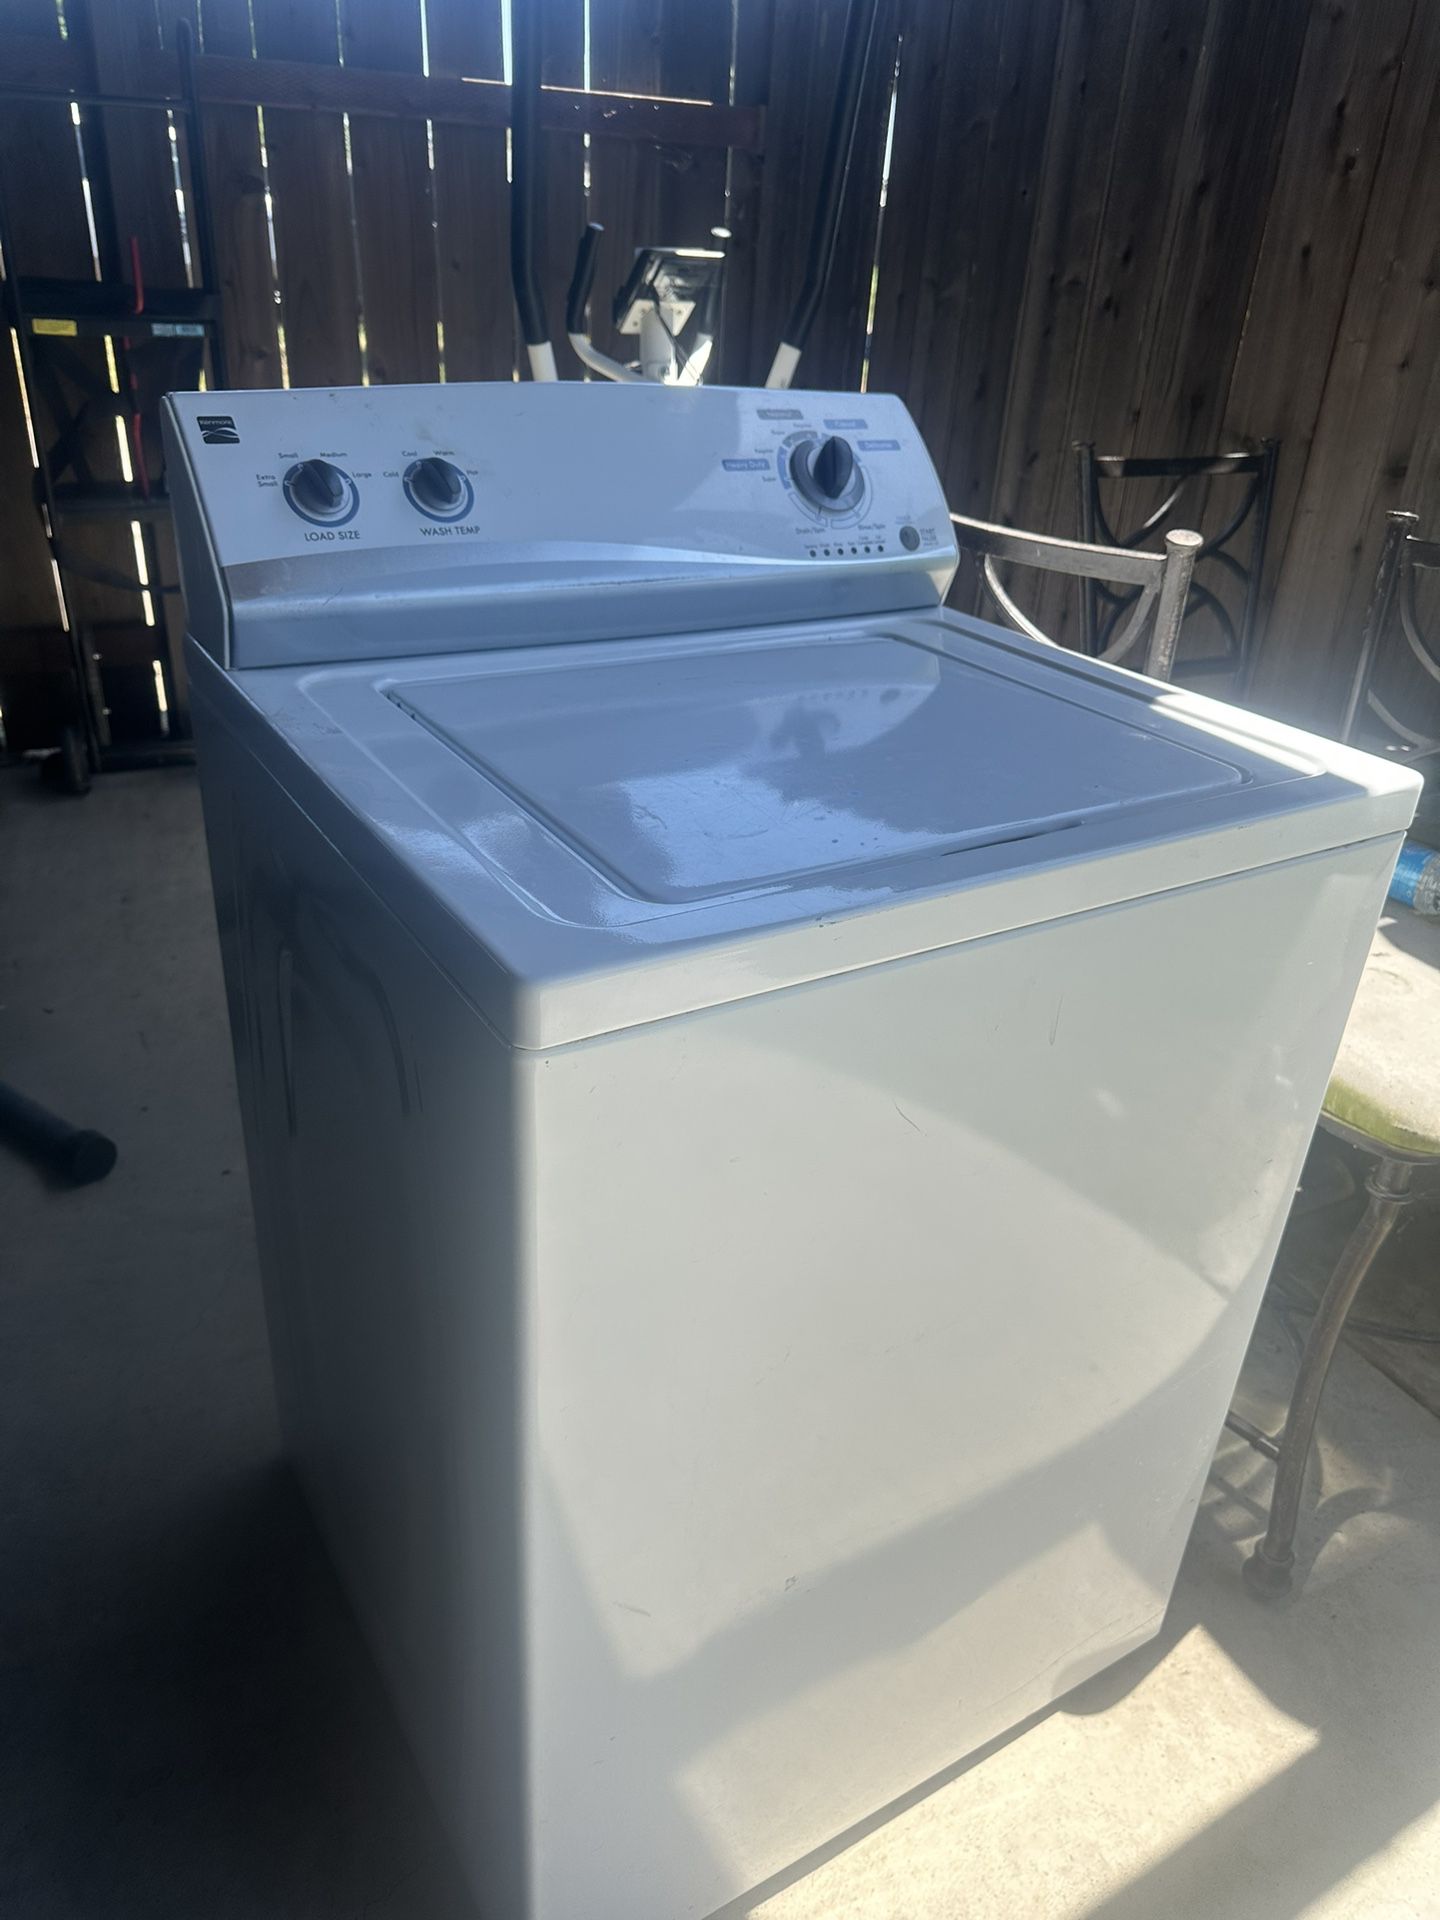 Kenmore Washer Super Cheap!